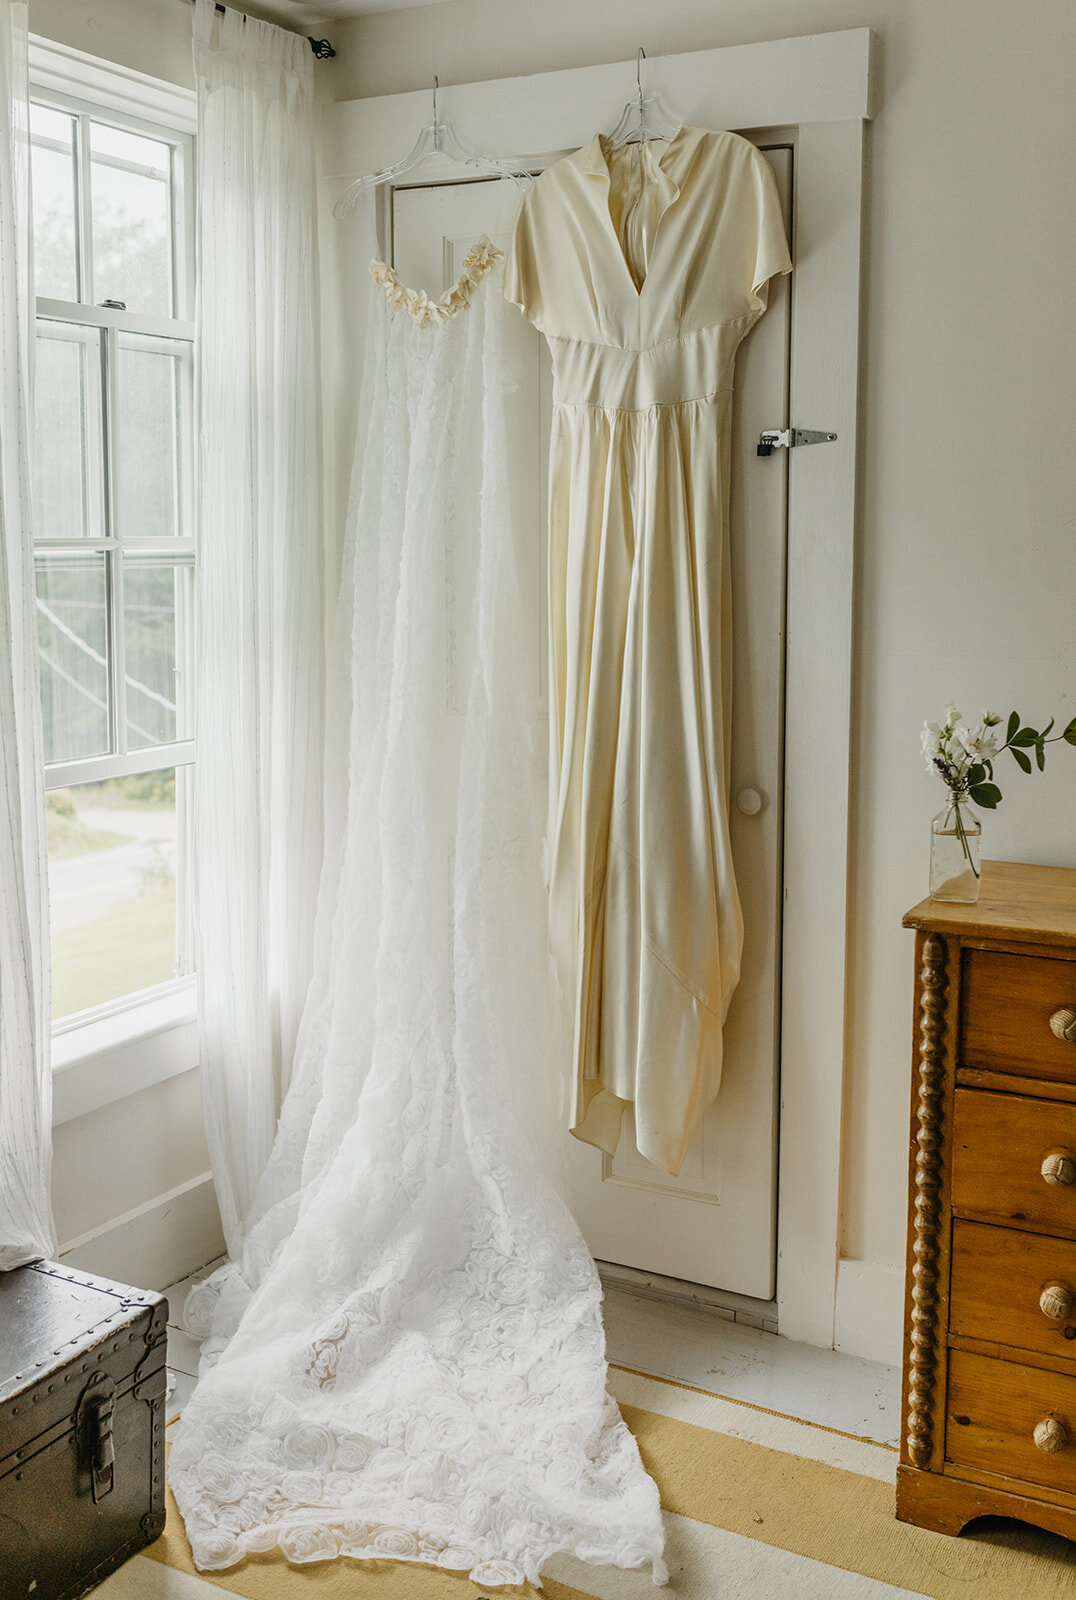 Bridal dresses hung on the front door for Maine wedding